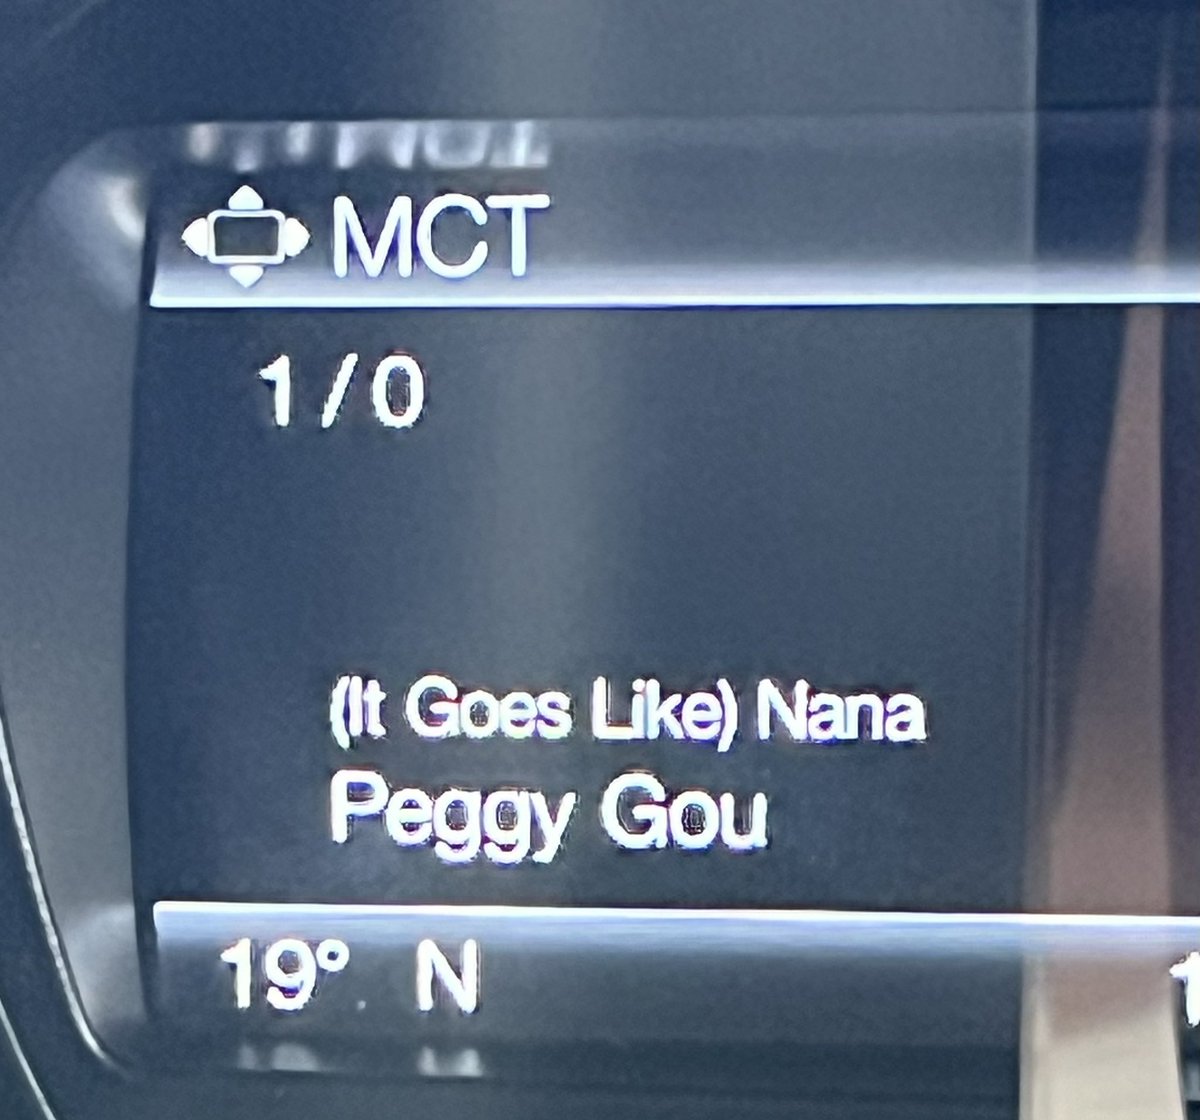 Alright Peggy, there are children watching. #UnfortunateTruncation